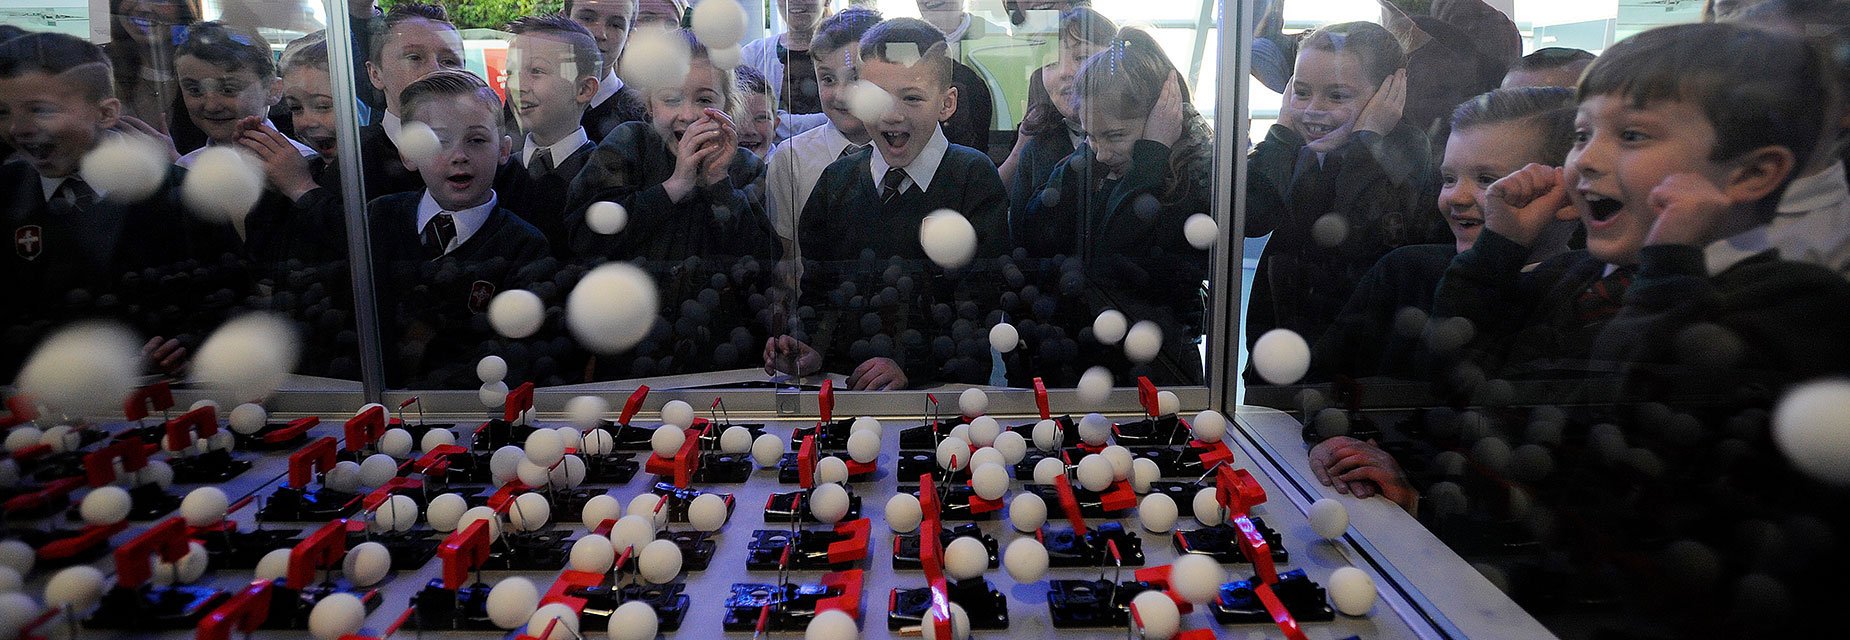 School pupils watch on in excitement as ping pong balls fly everywhere in a chain reaction demonstration